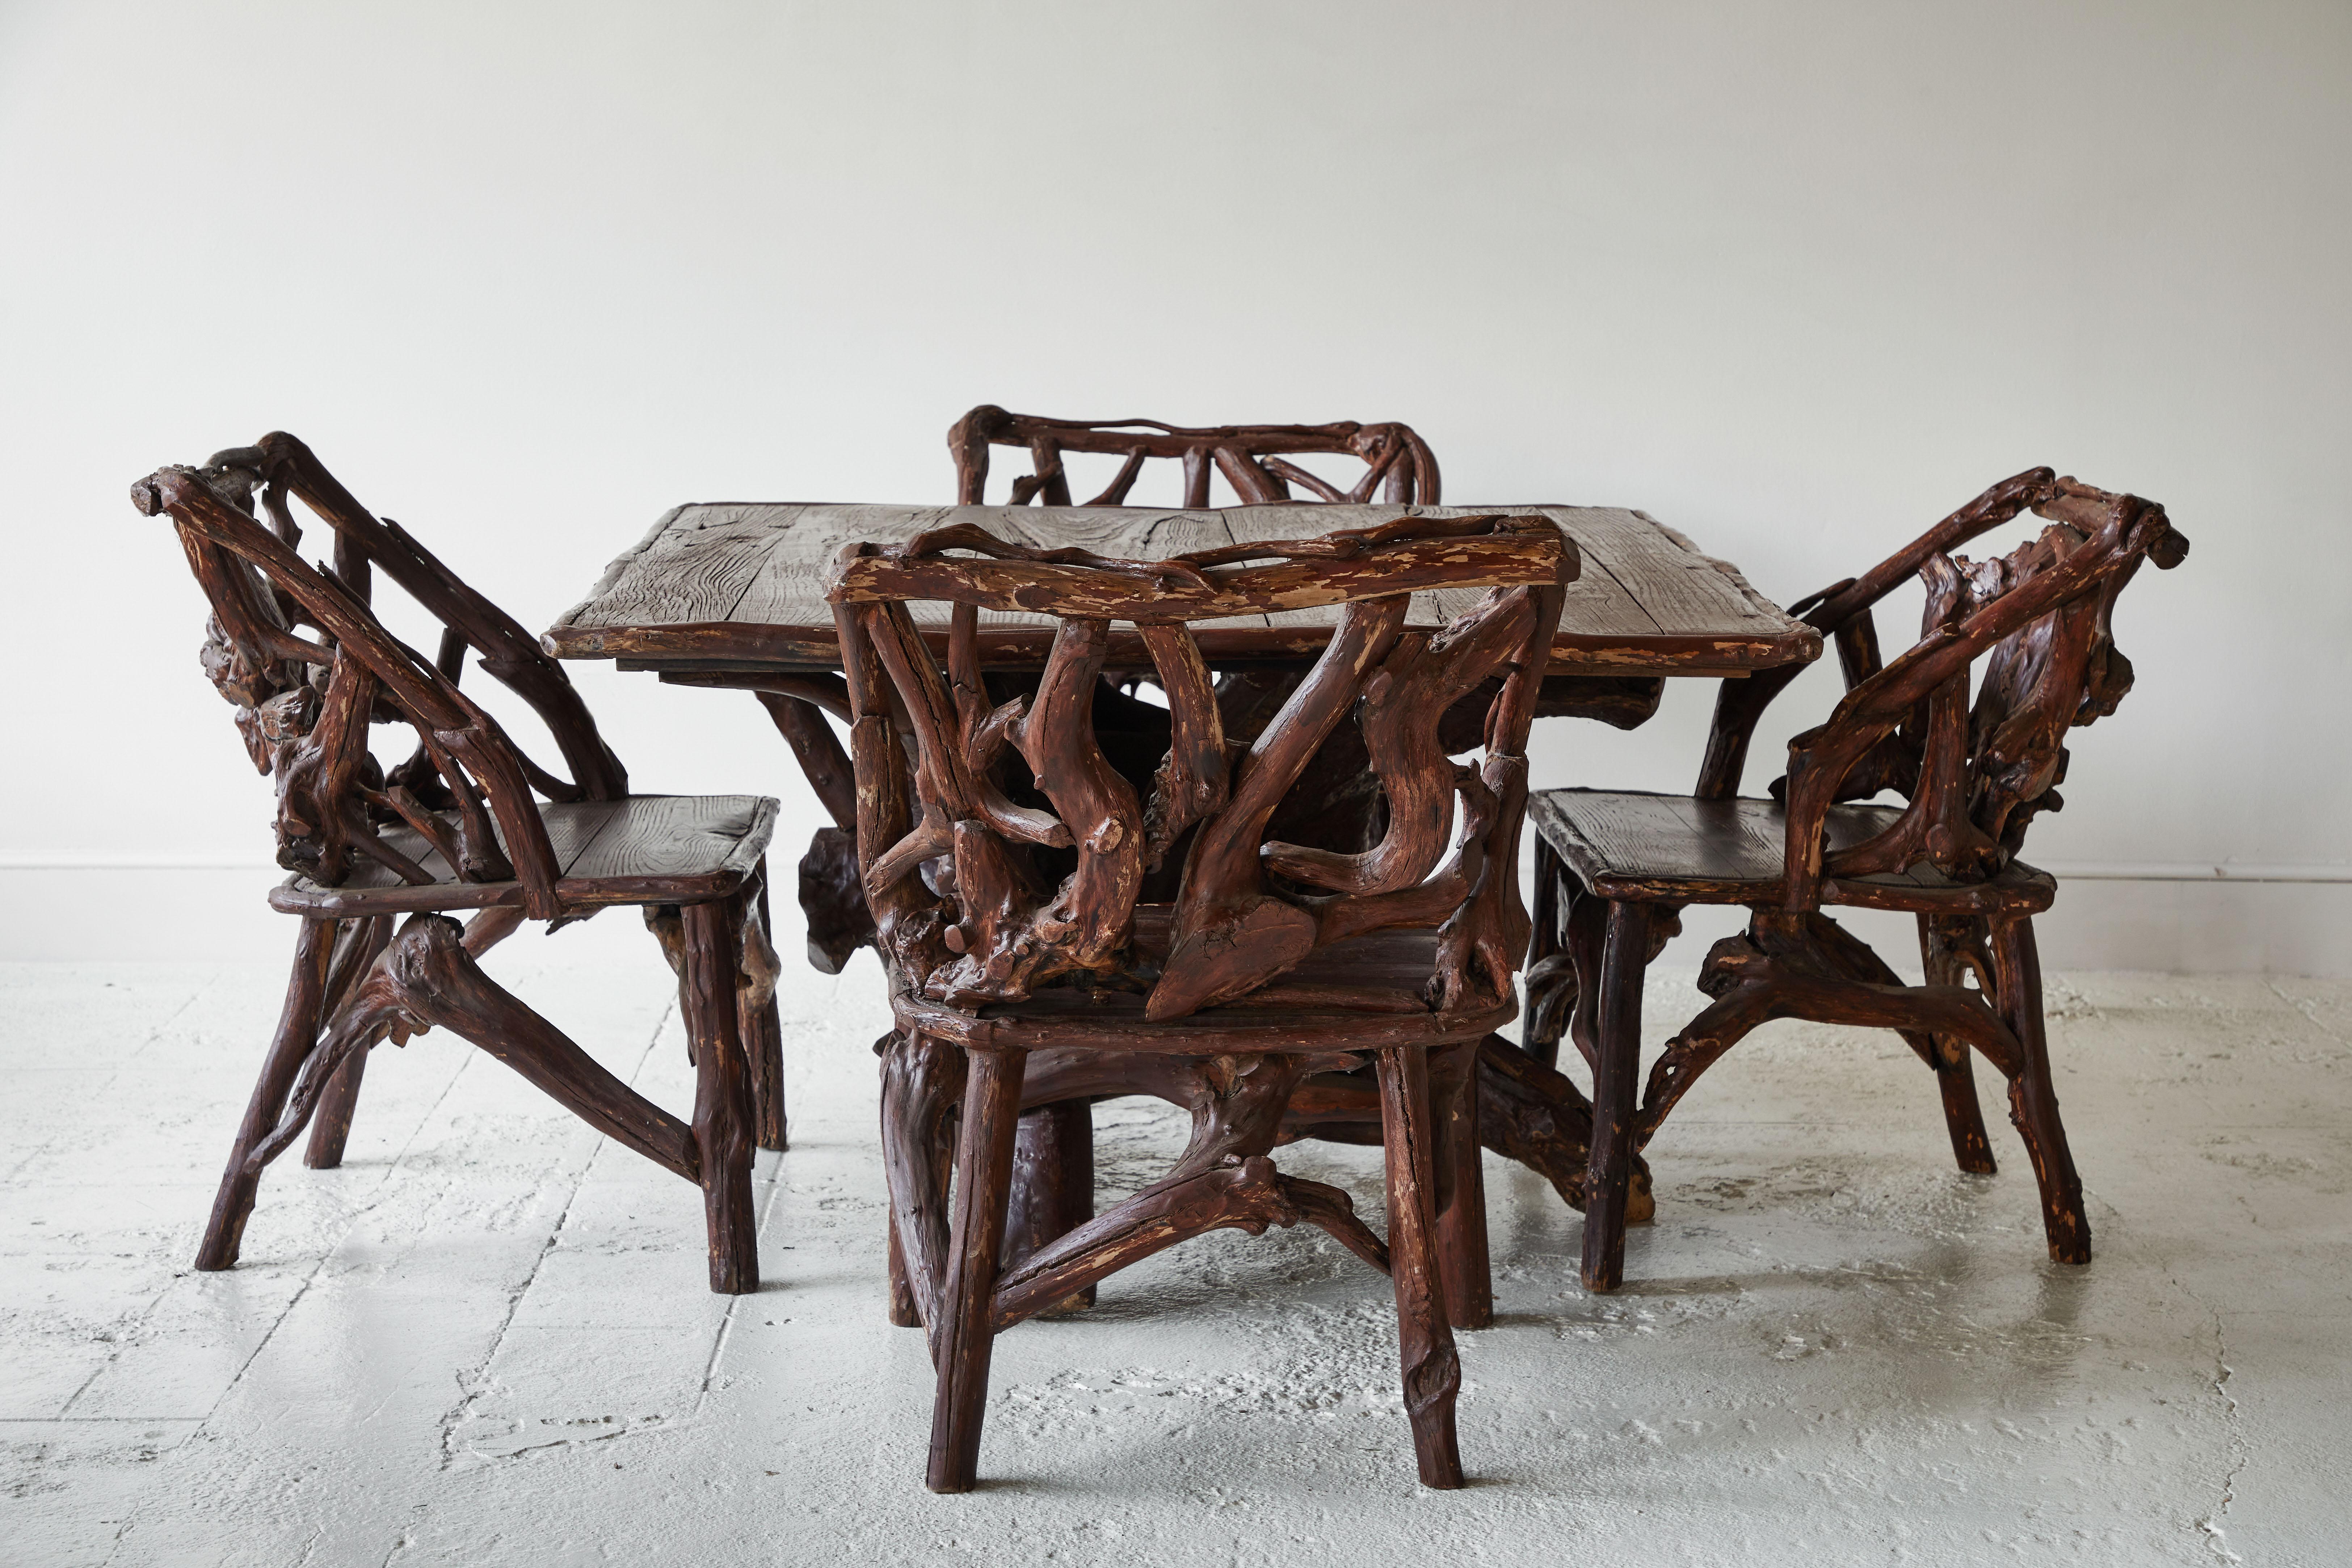 Vintage root table with coordinating set of 4 root chairs. The set boasts character and charm with the root bases. This table and chair is unique and one of a kind. The chairs measure: 25.5